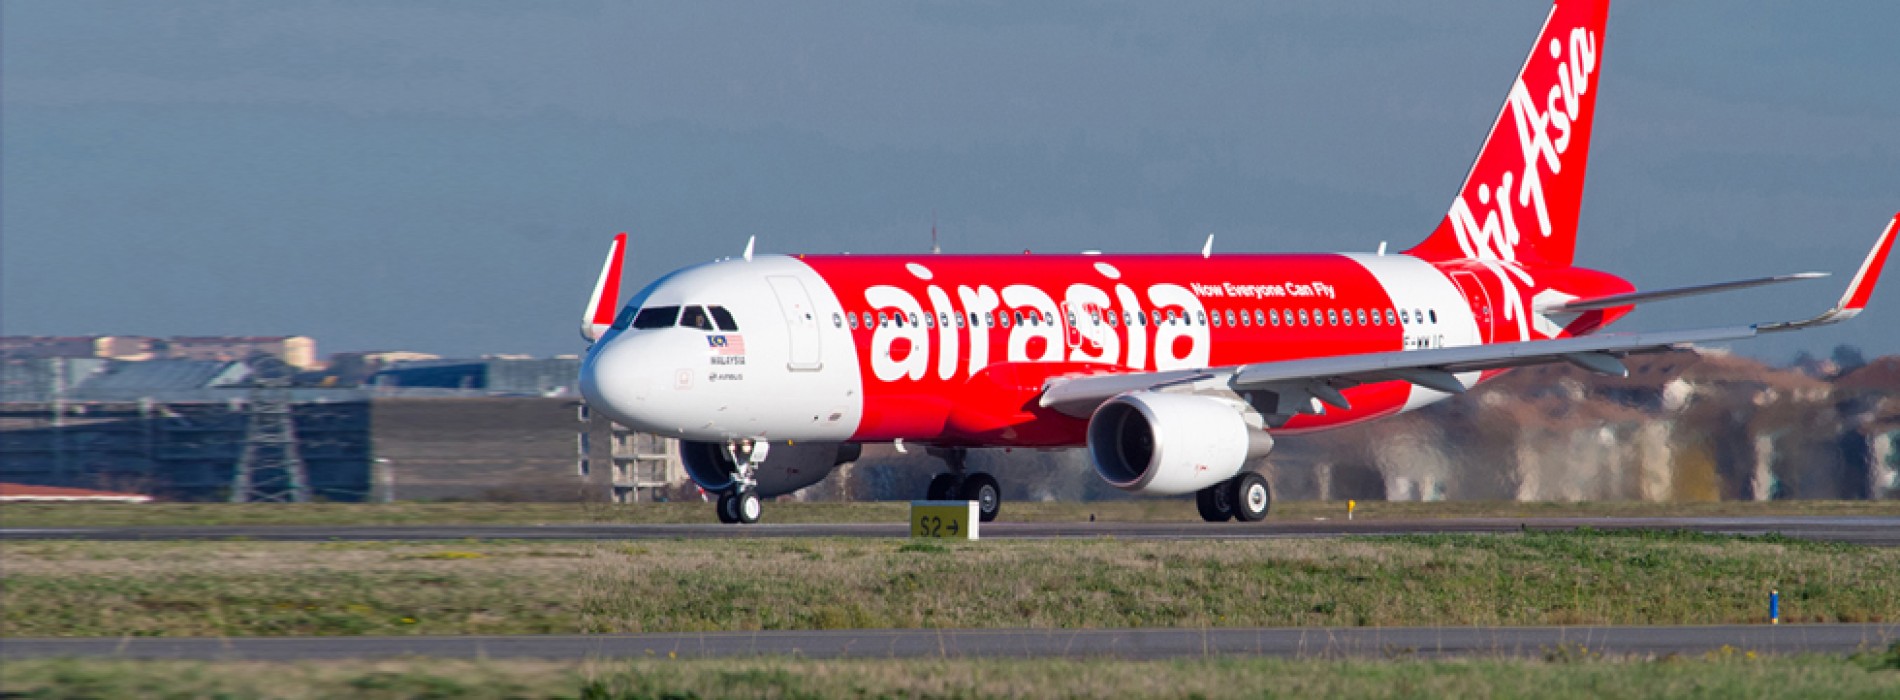 AirAsia India adds one A320 aircraft to launch three new routes